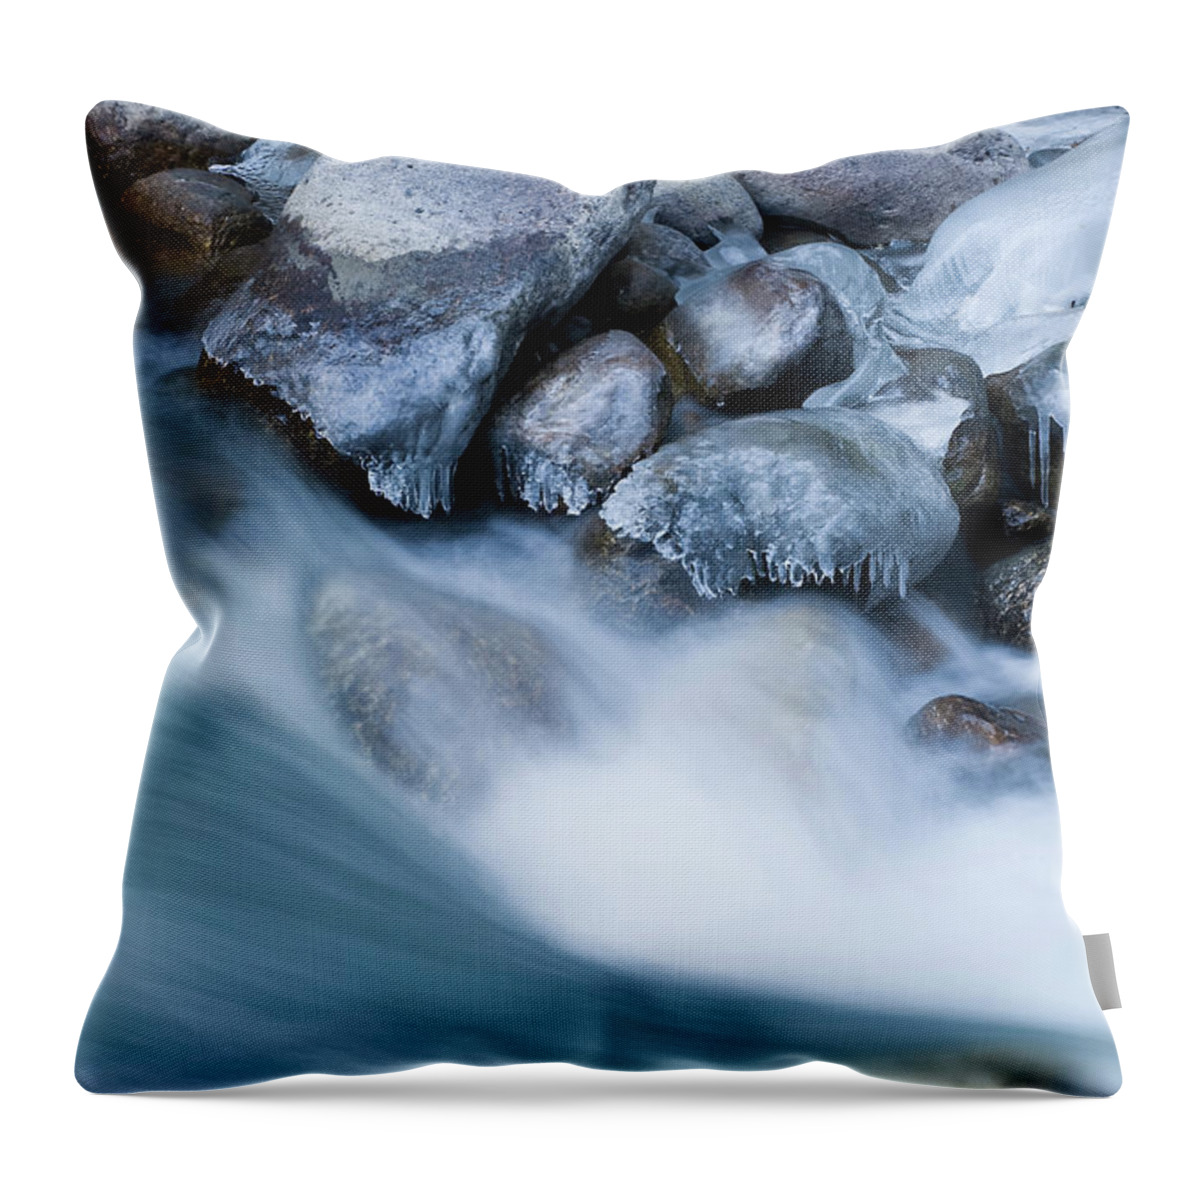 Himalayas Throw Pillow featuring the photograph Blurred View Of Rocky Frozen River by Cultura Exclusive/ben Pipe Photography